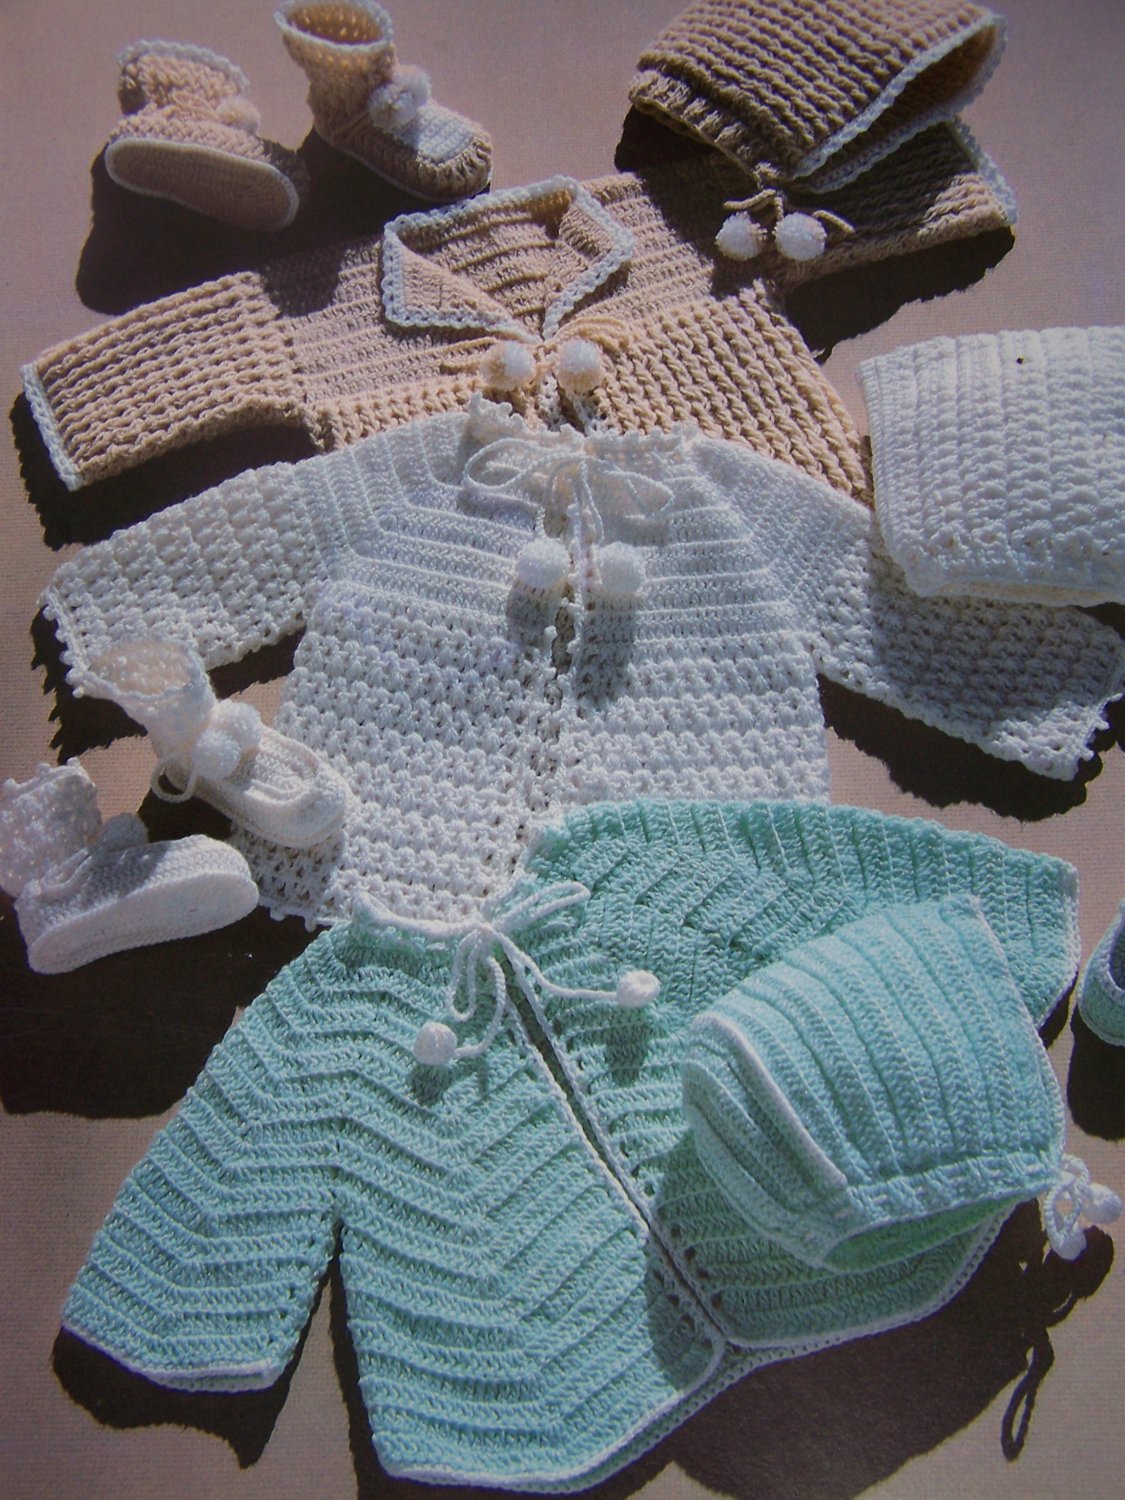 New 1980's Vintage Crochet Patterns 6 Layette Sets Baby Sweaters ...